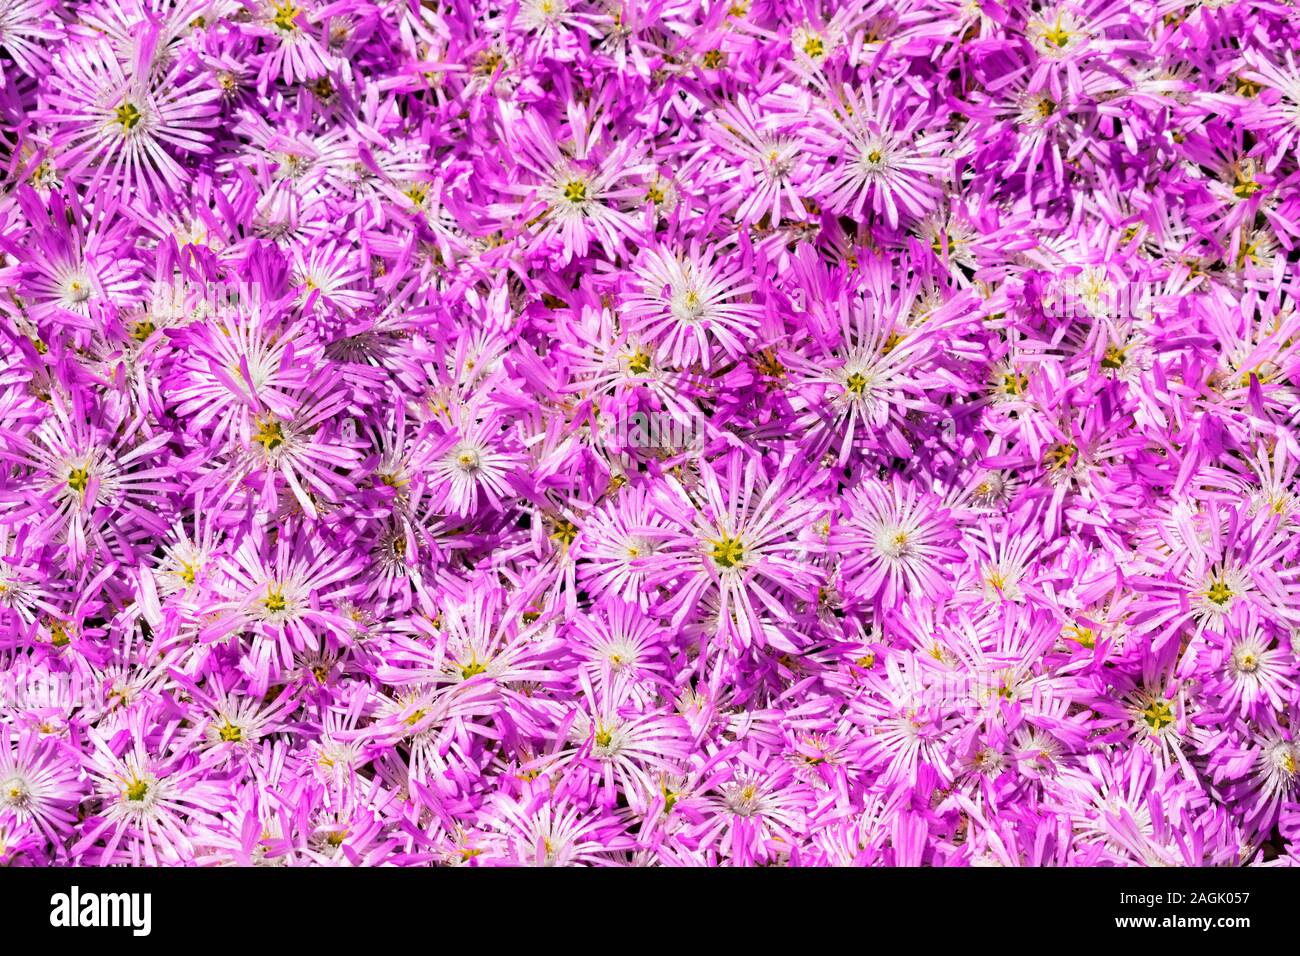 Colorful blooming pink and purple flower carpet close up. Lampranthus is flowering succulent plant in Aizoaceae family. Stock Photo